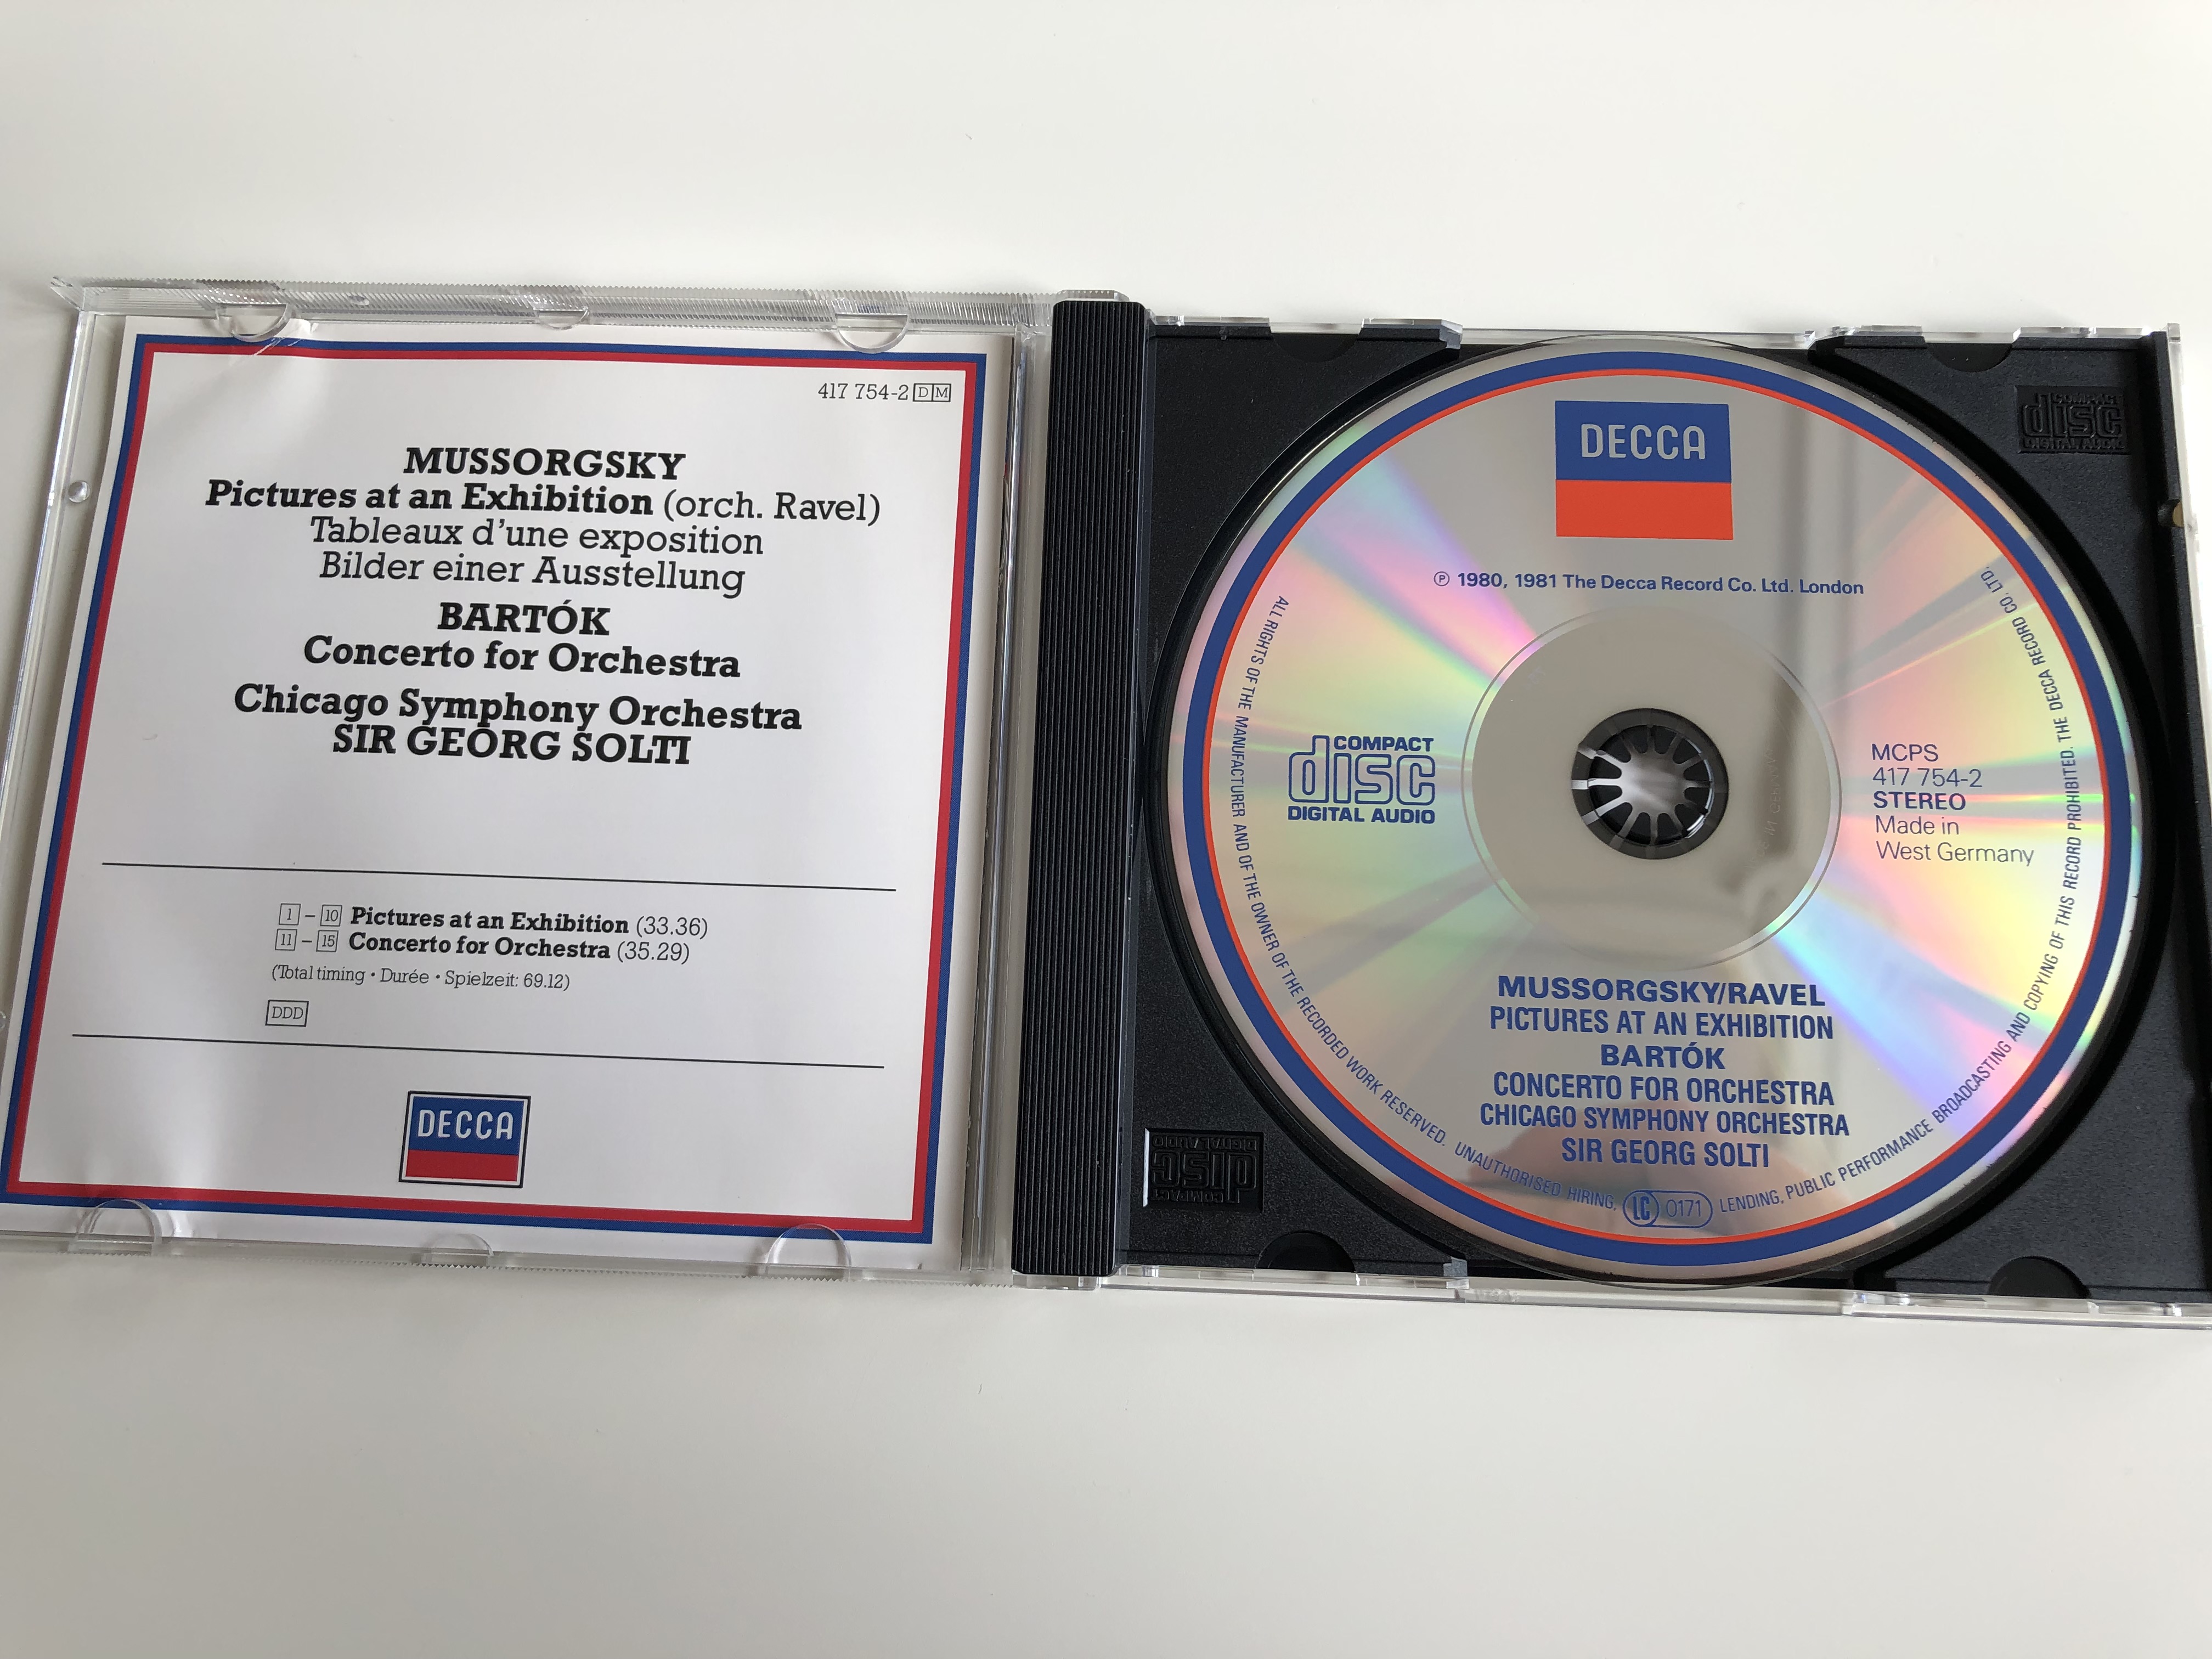 mussorgsky-ravel-pictures-at-an-exhibition-bart-k-concerto-for-orchestra-chicago-symphony-orchestra-sir-georg-solti-decca-audio-cd-1988-stereo-417-754-2-2-.jpg